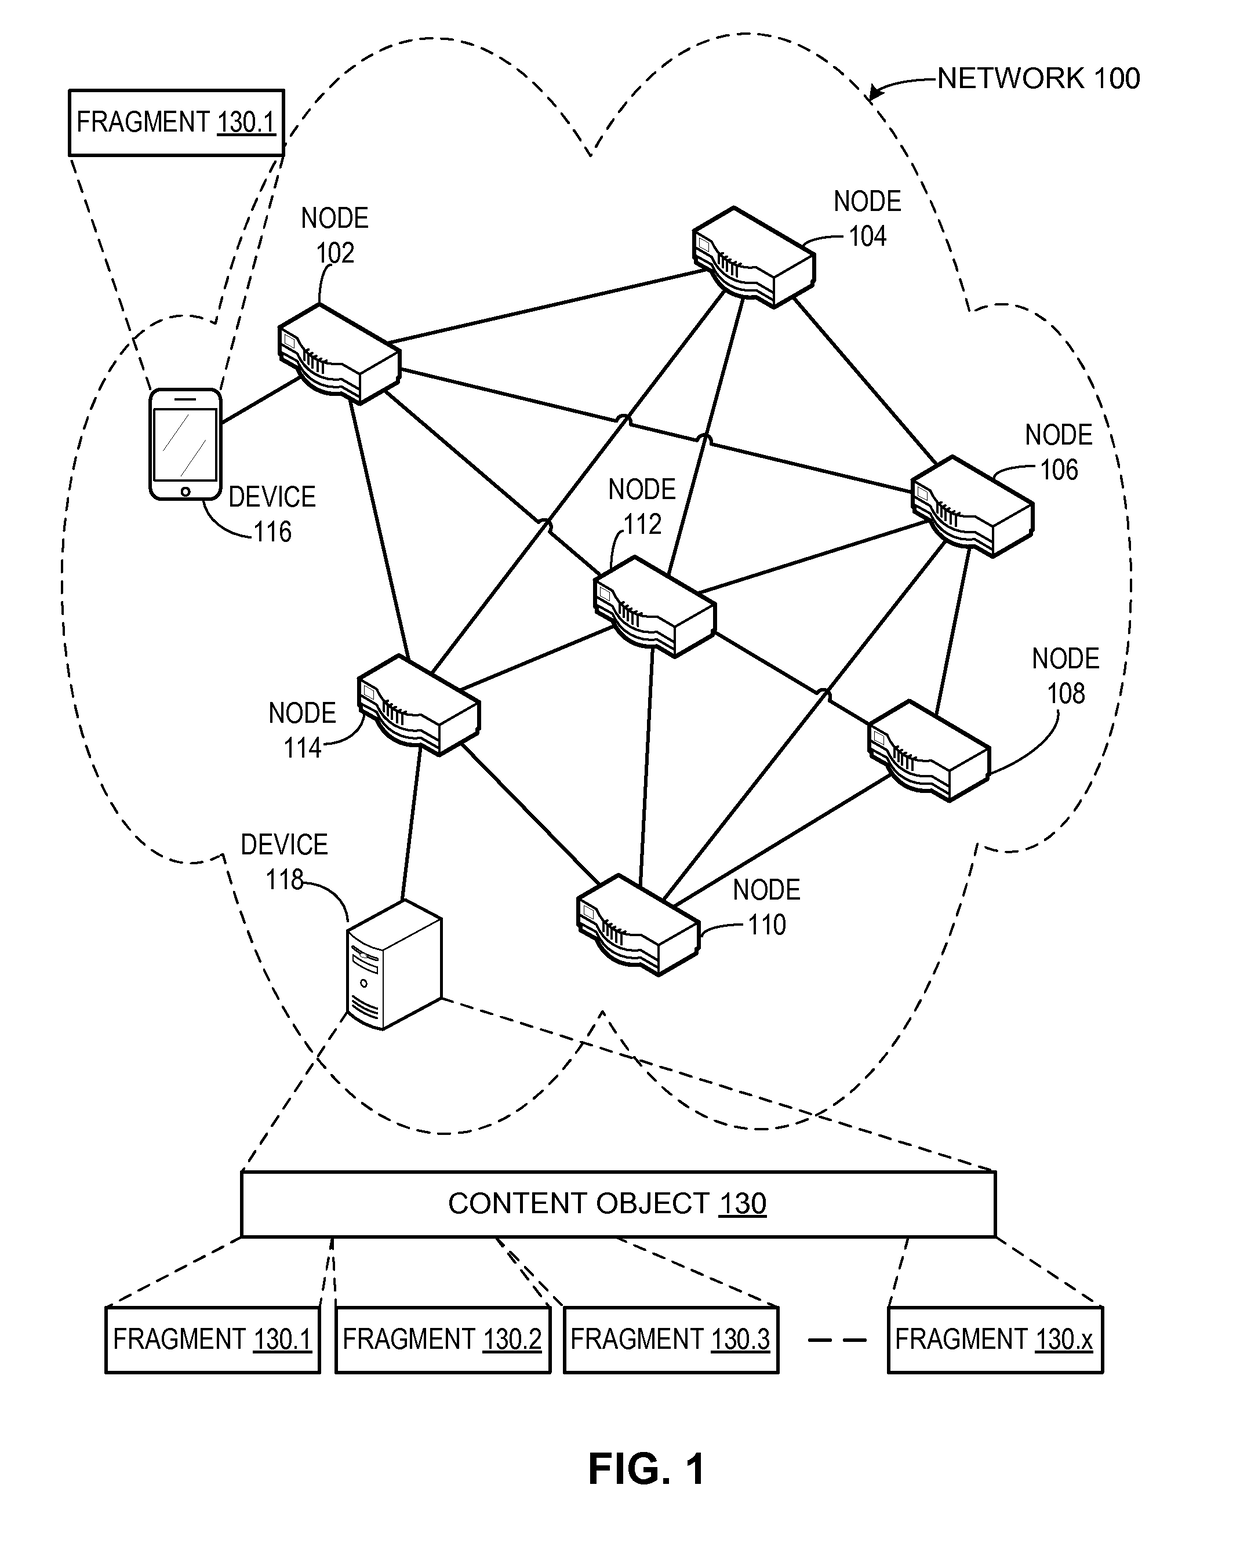 Network named fragments in a content centric network